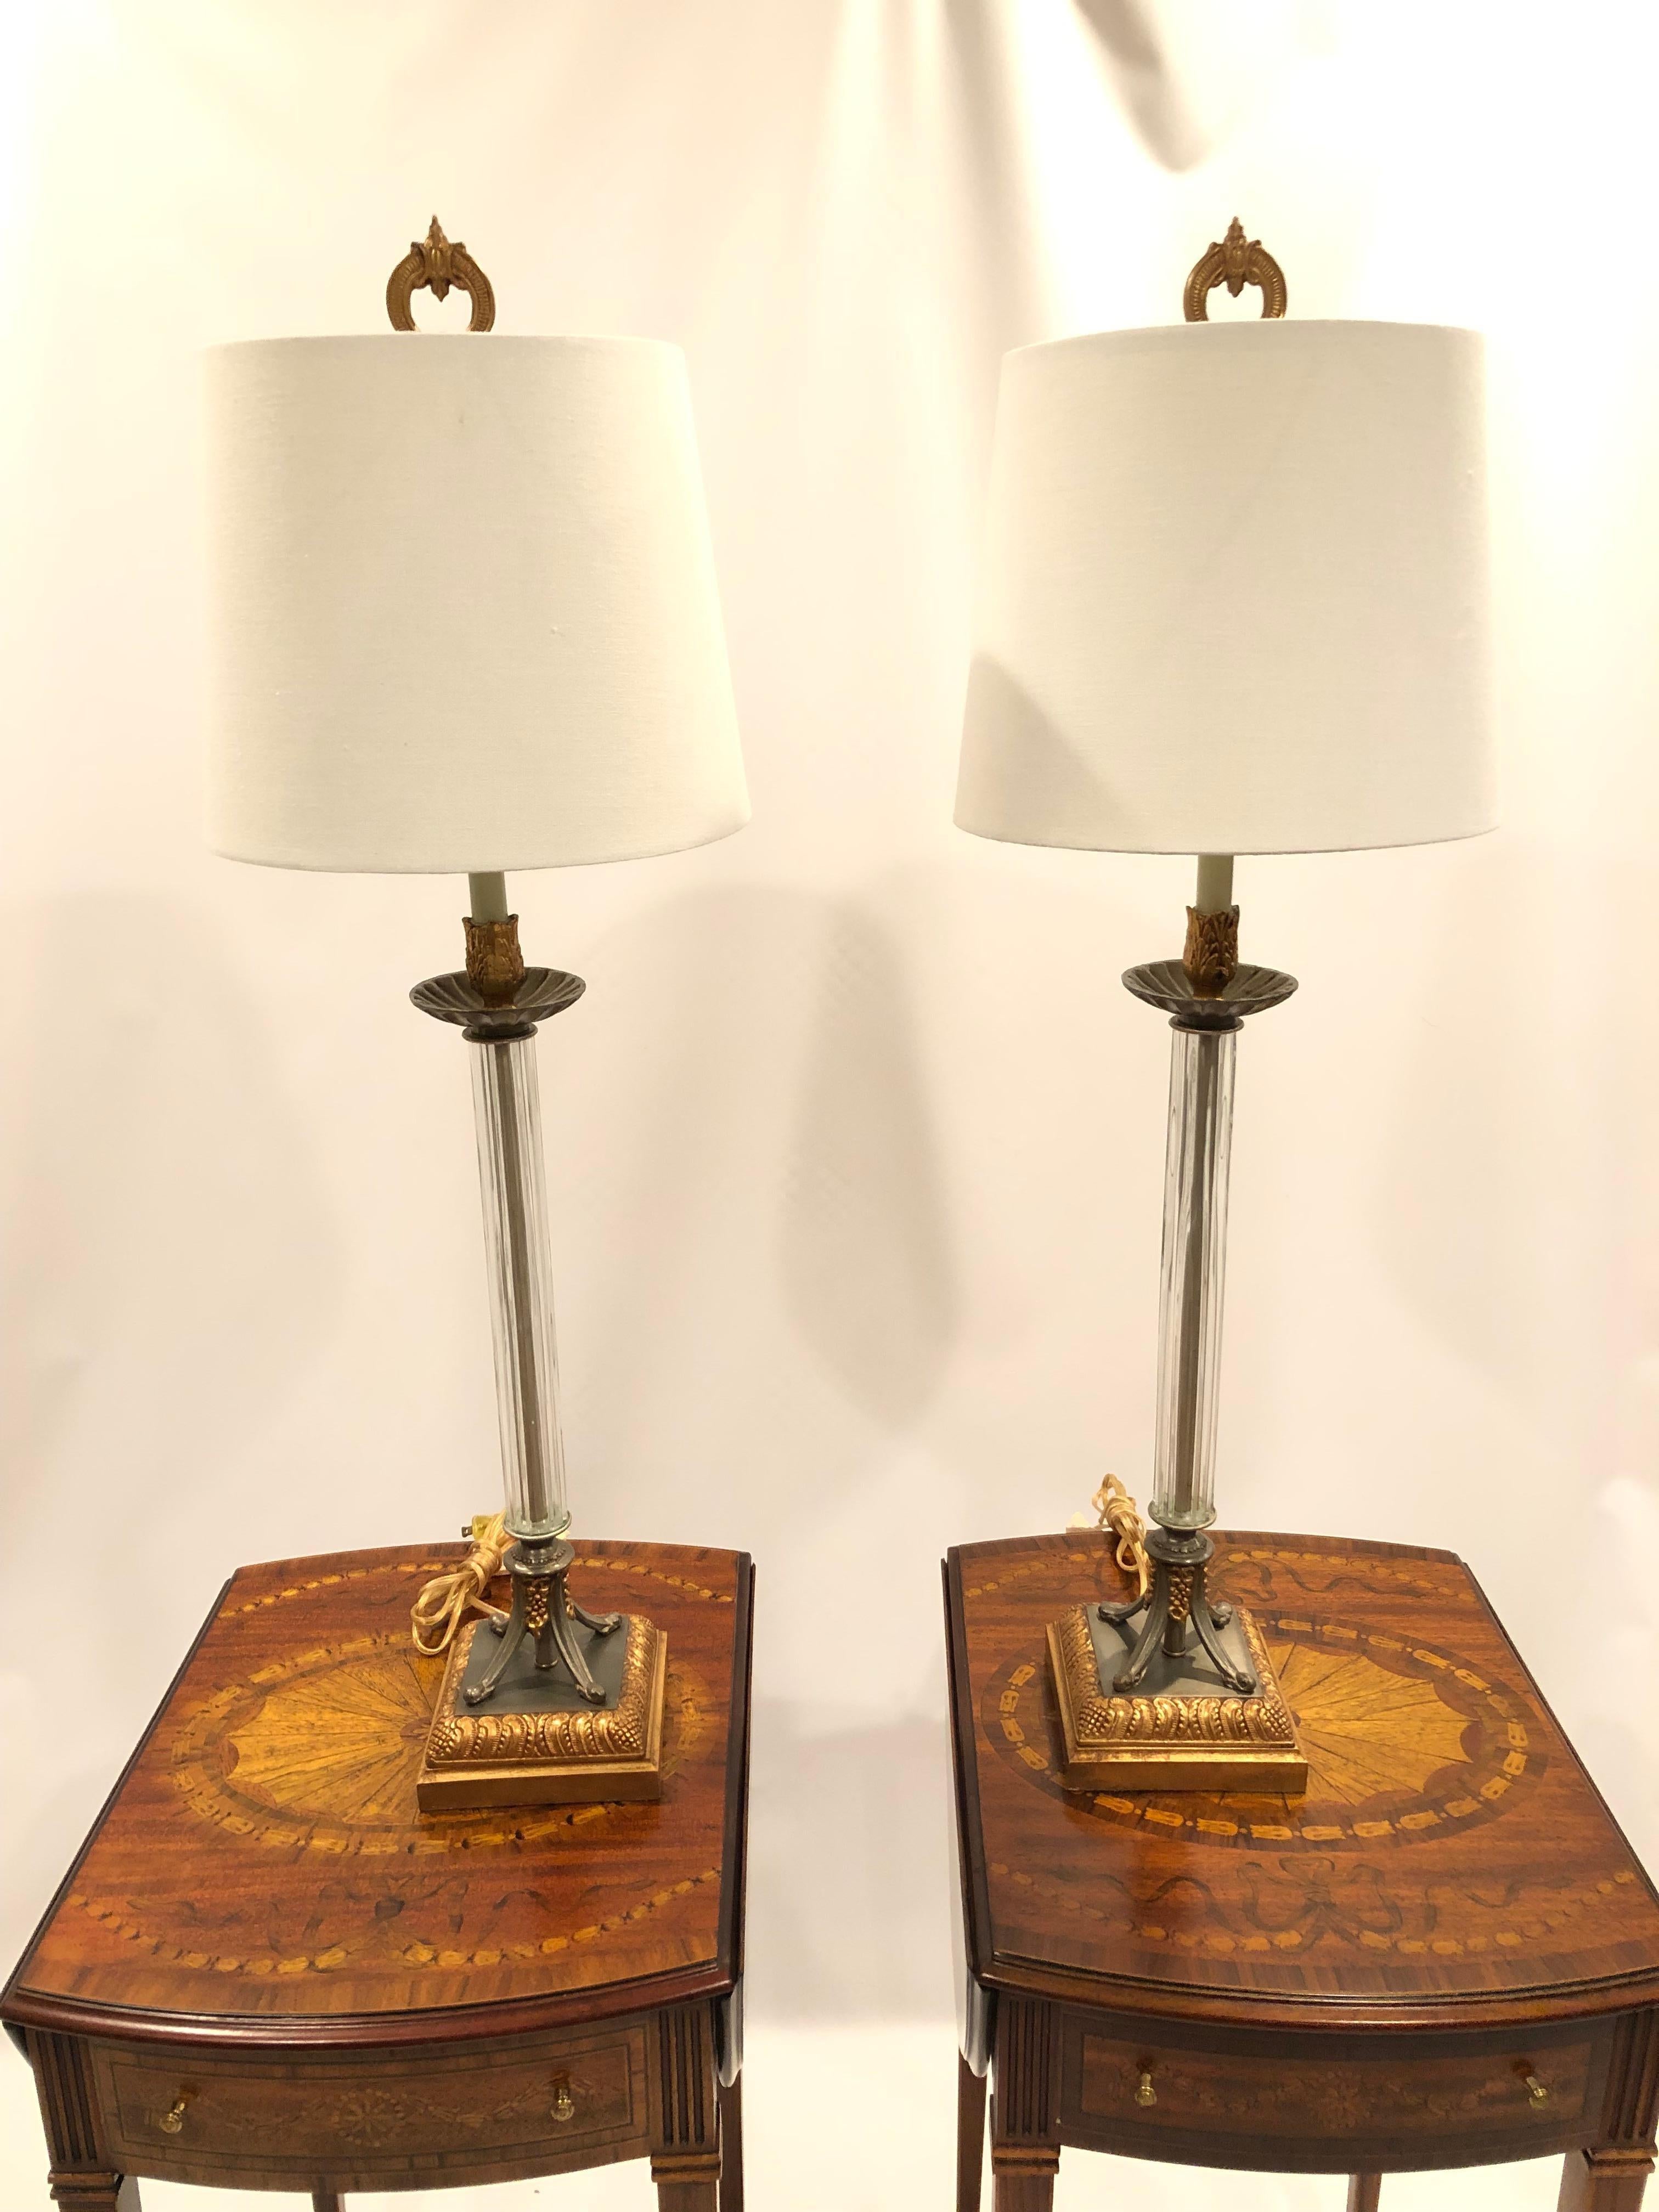 Beautiful pair of gilt metal and crystal column shaped lamps where the blend of gold and greyish celadon metal make an elegant statement.
Bases are 5.5 square.